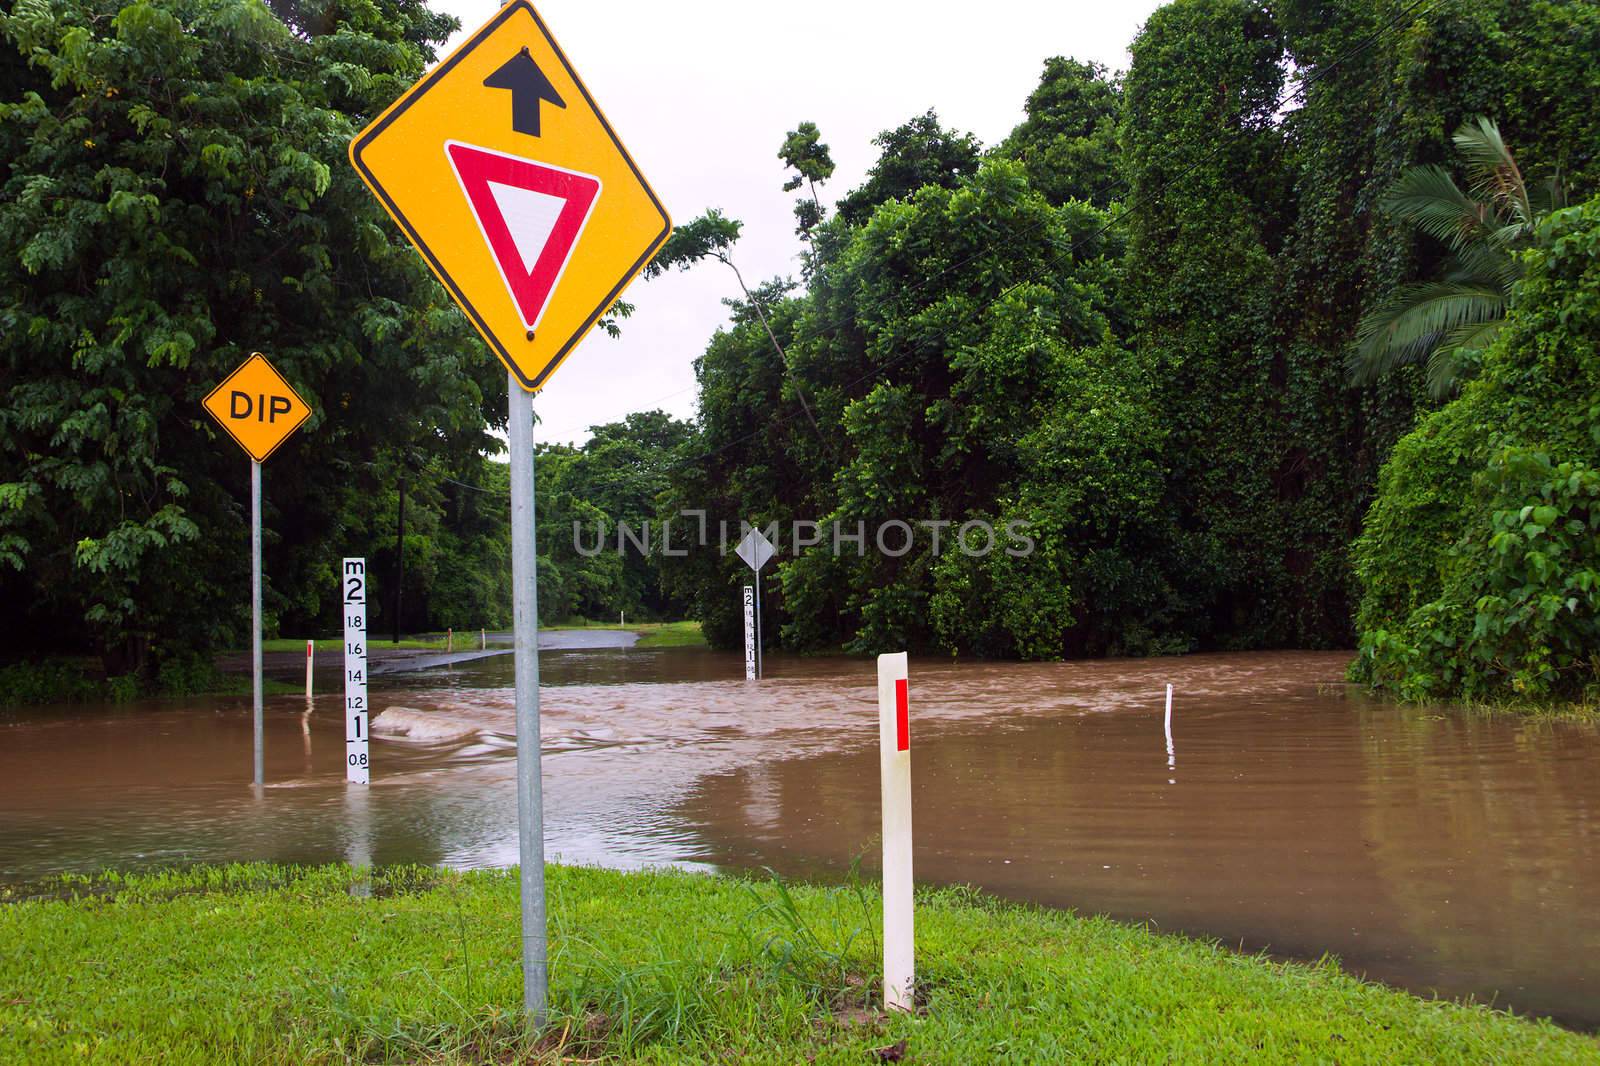 Flooded road with depth indicators and give way sign in Queensla by Jaykayl